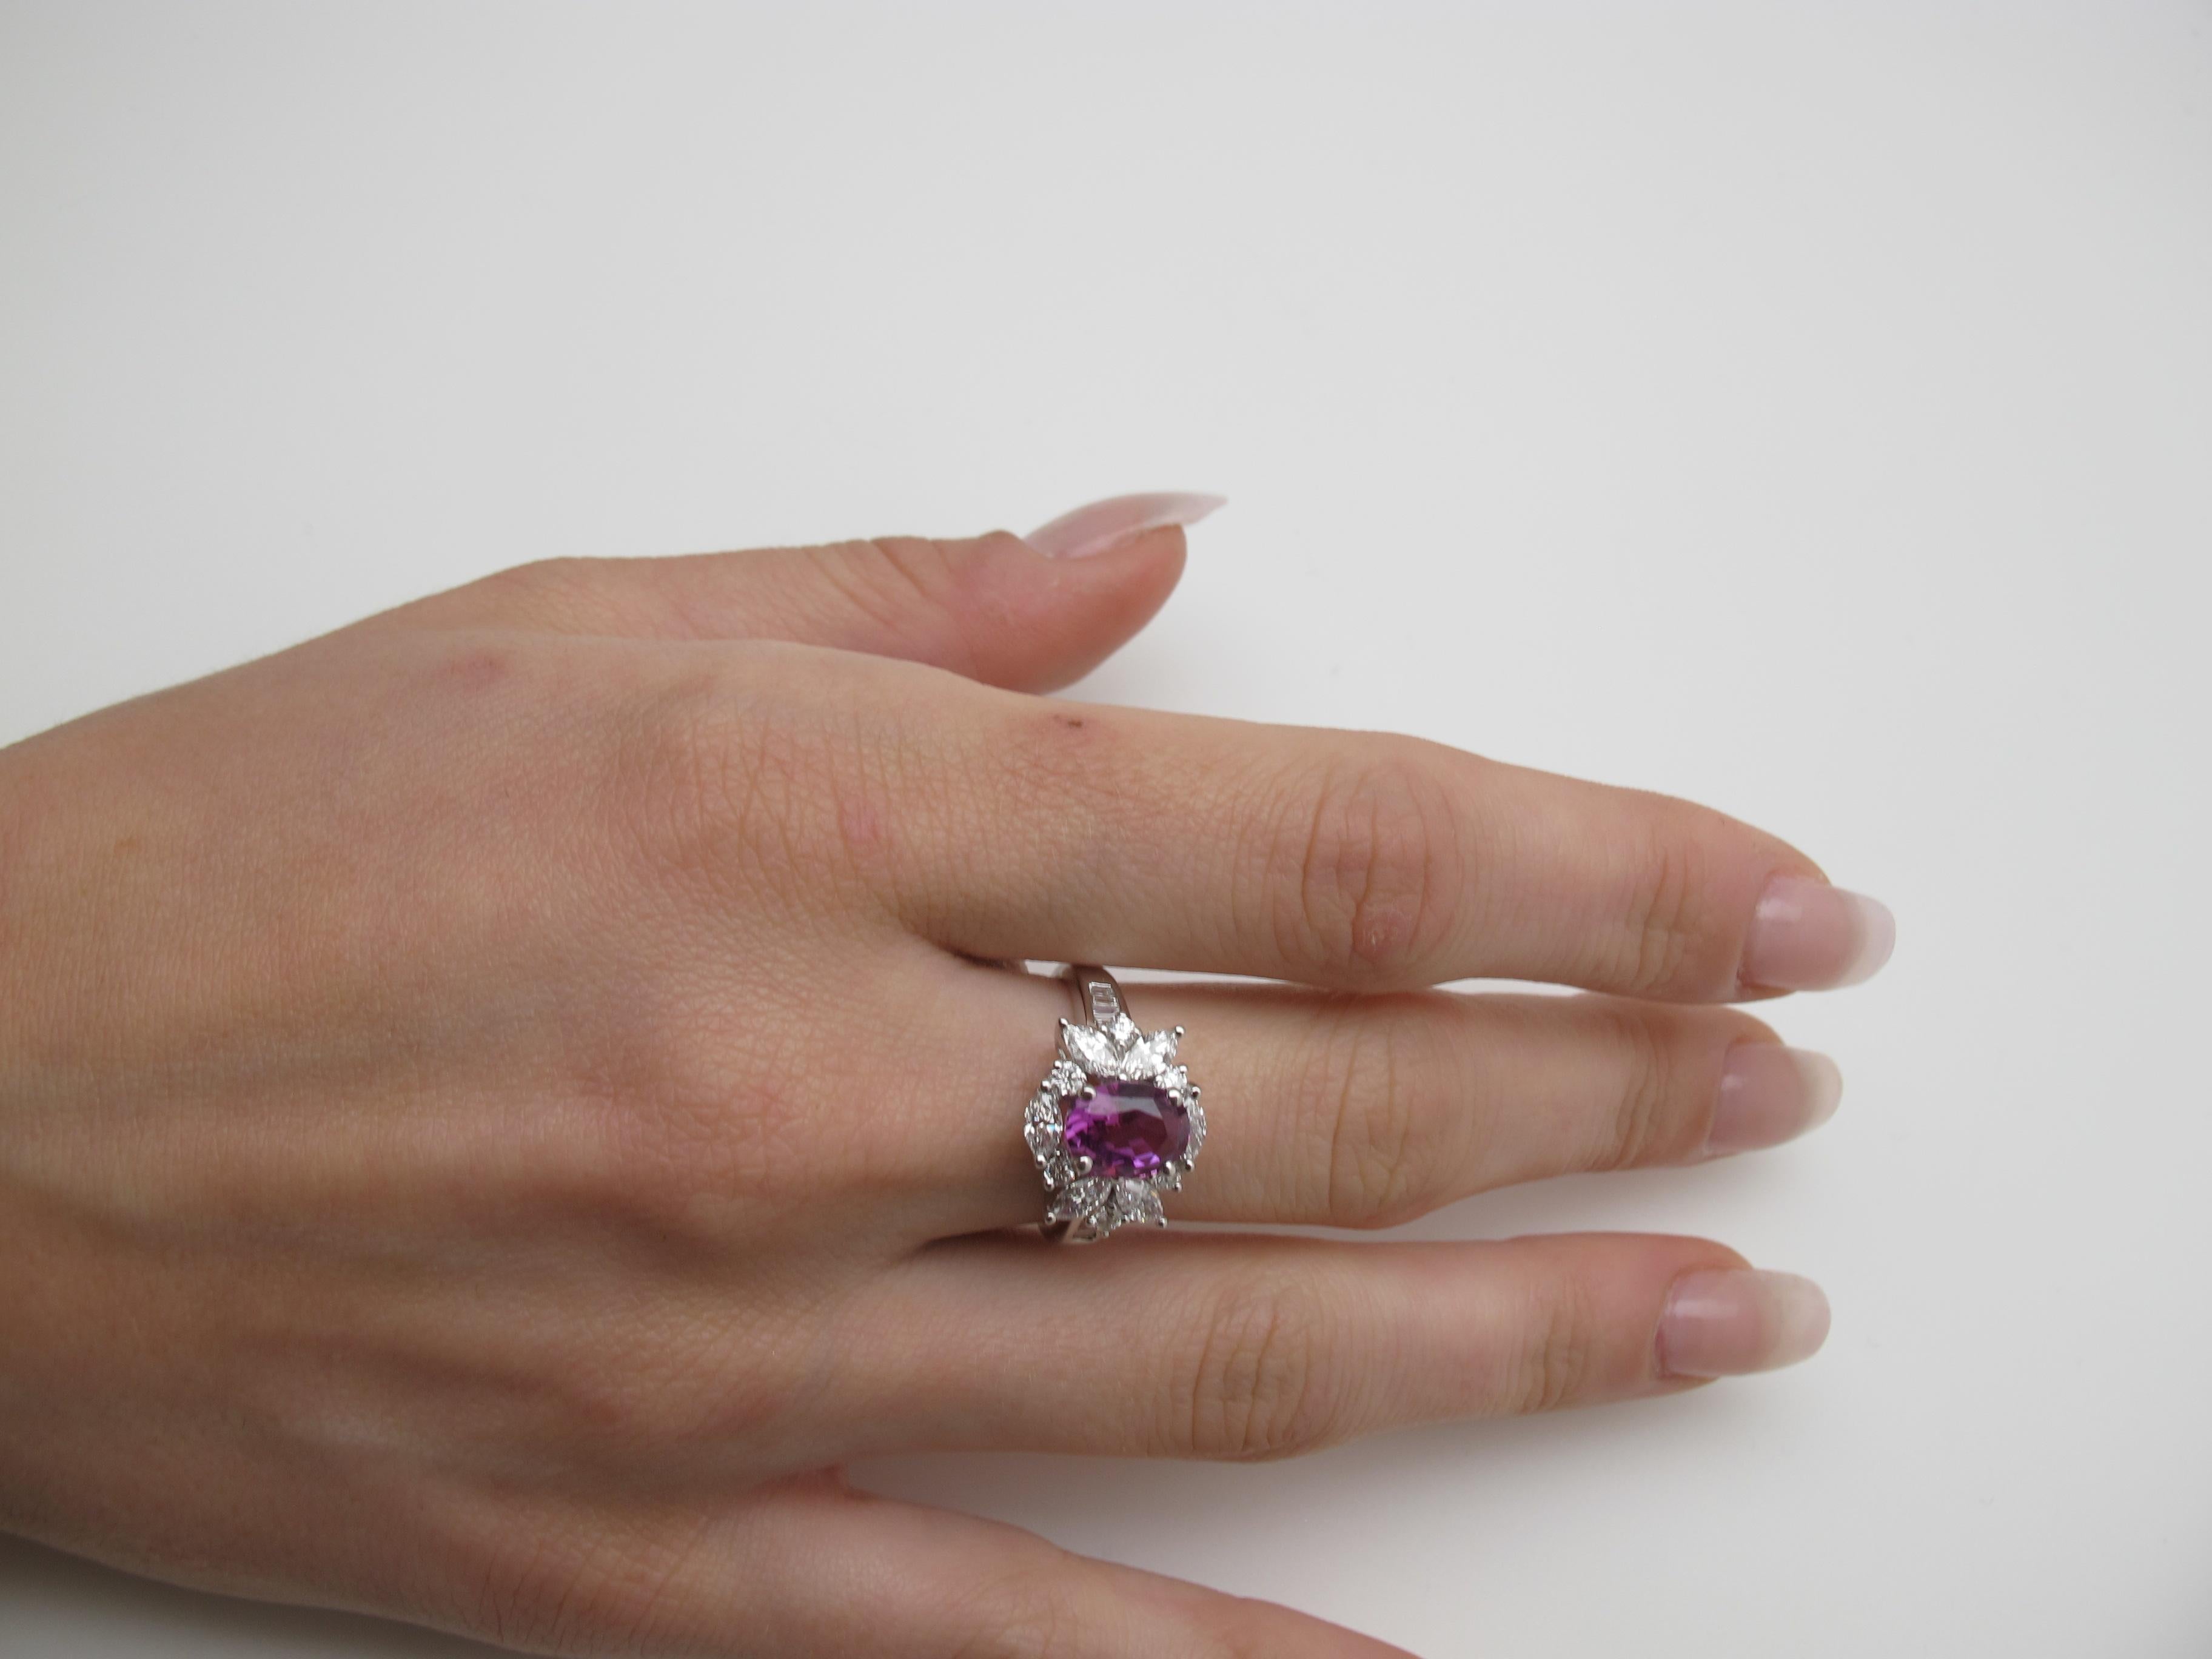 Oval Cut 2.27 ct. Hot Pink Sapphire Oval, Diamond Marquise 18k White Gold Cocktail Ring